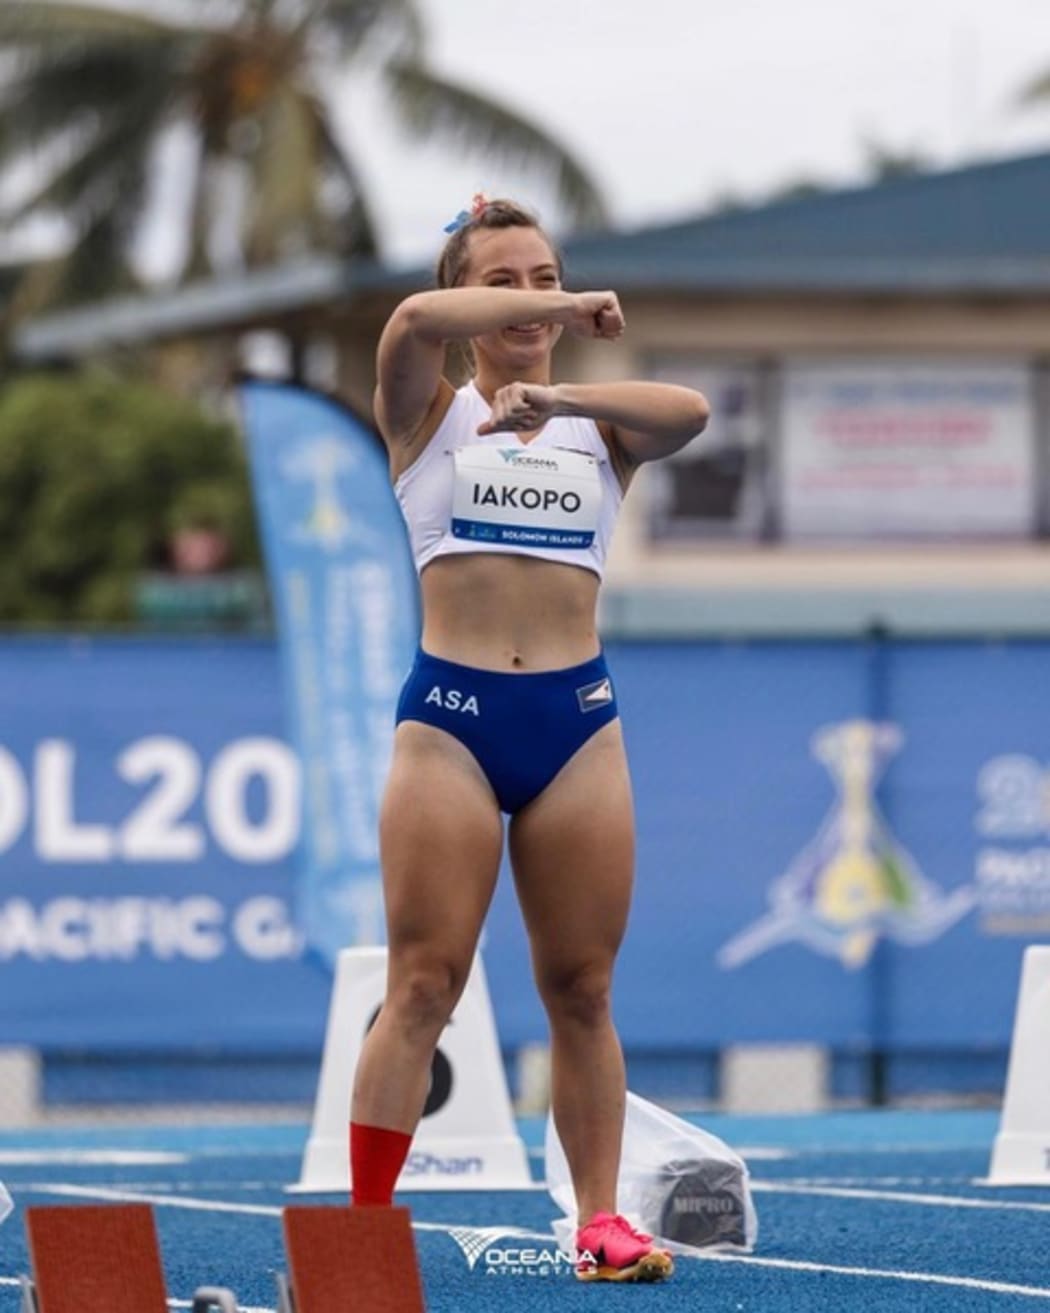 Iakopo qualified for the Olympics by competing in multiple qualifying events and achieving the required times in sanctioned competitions.